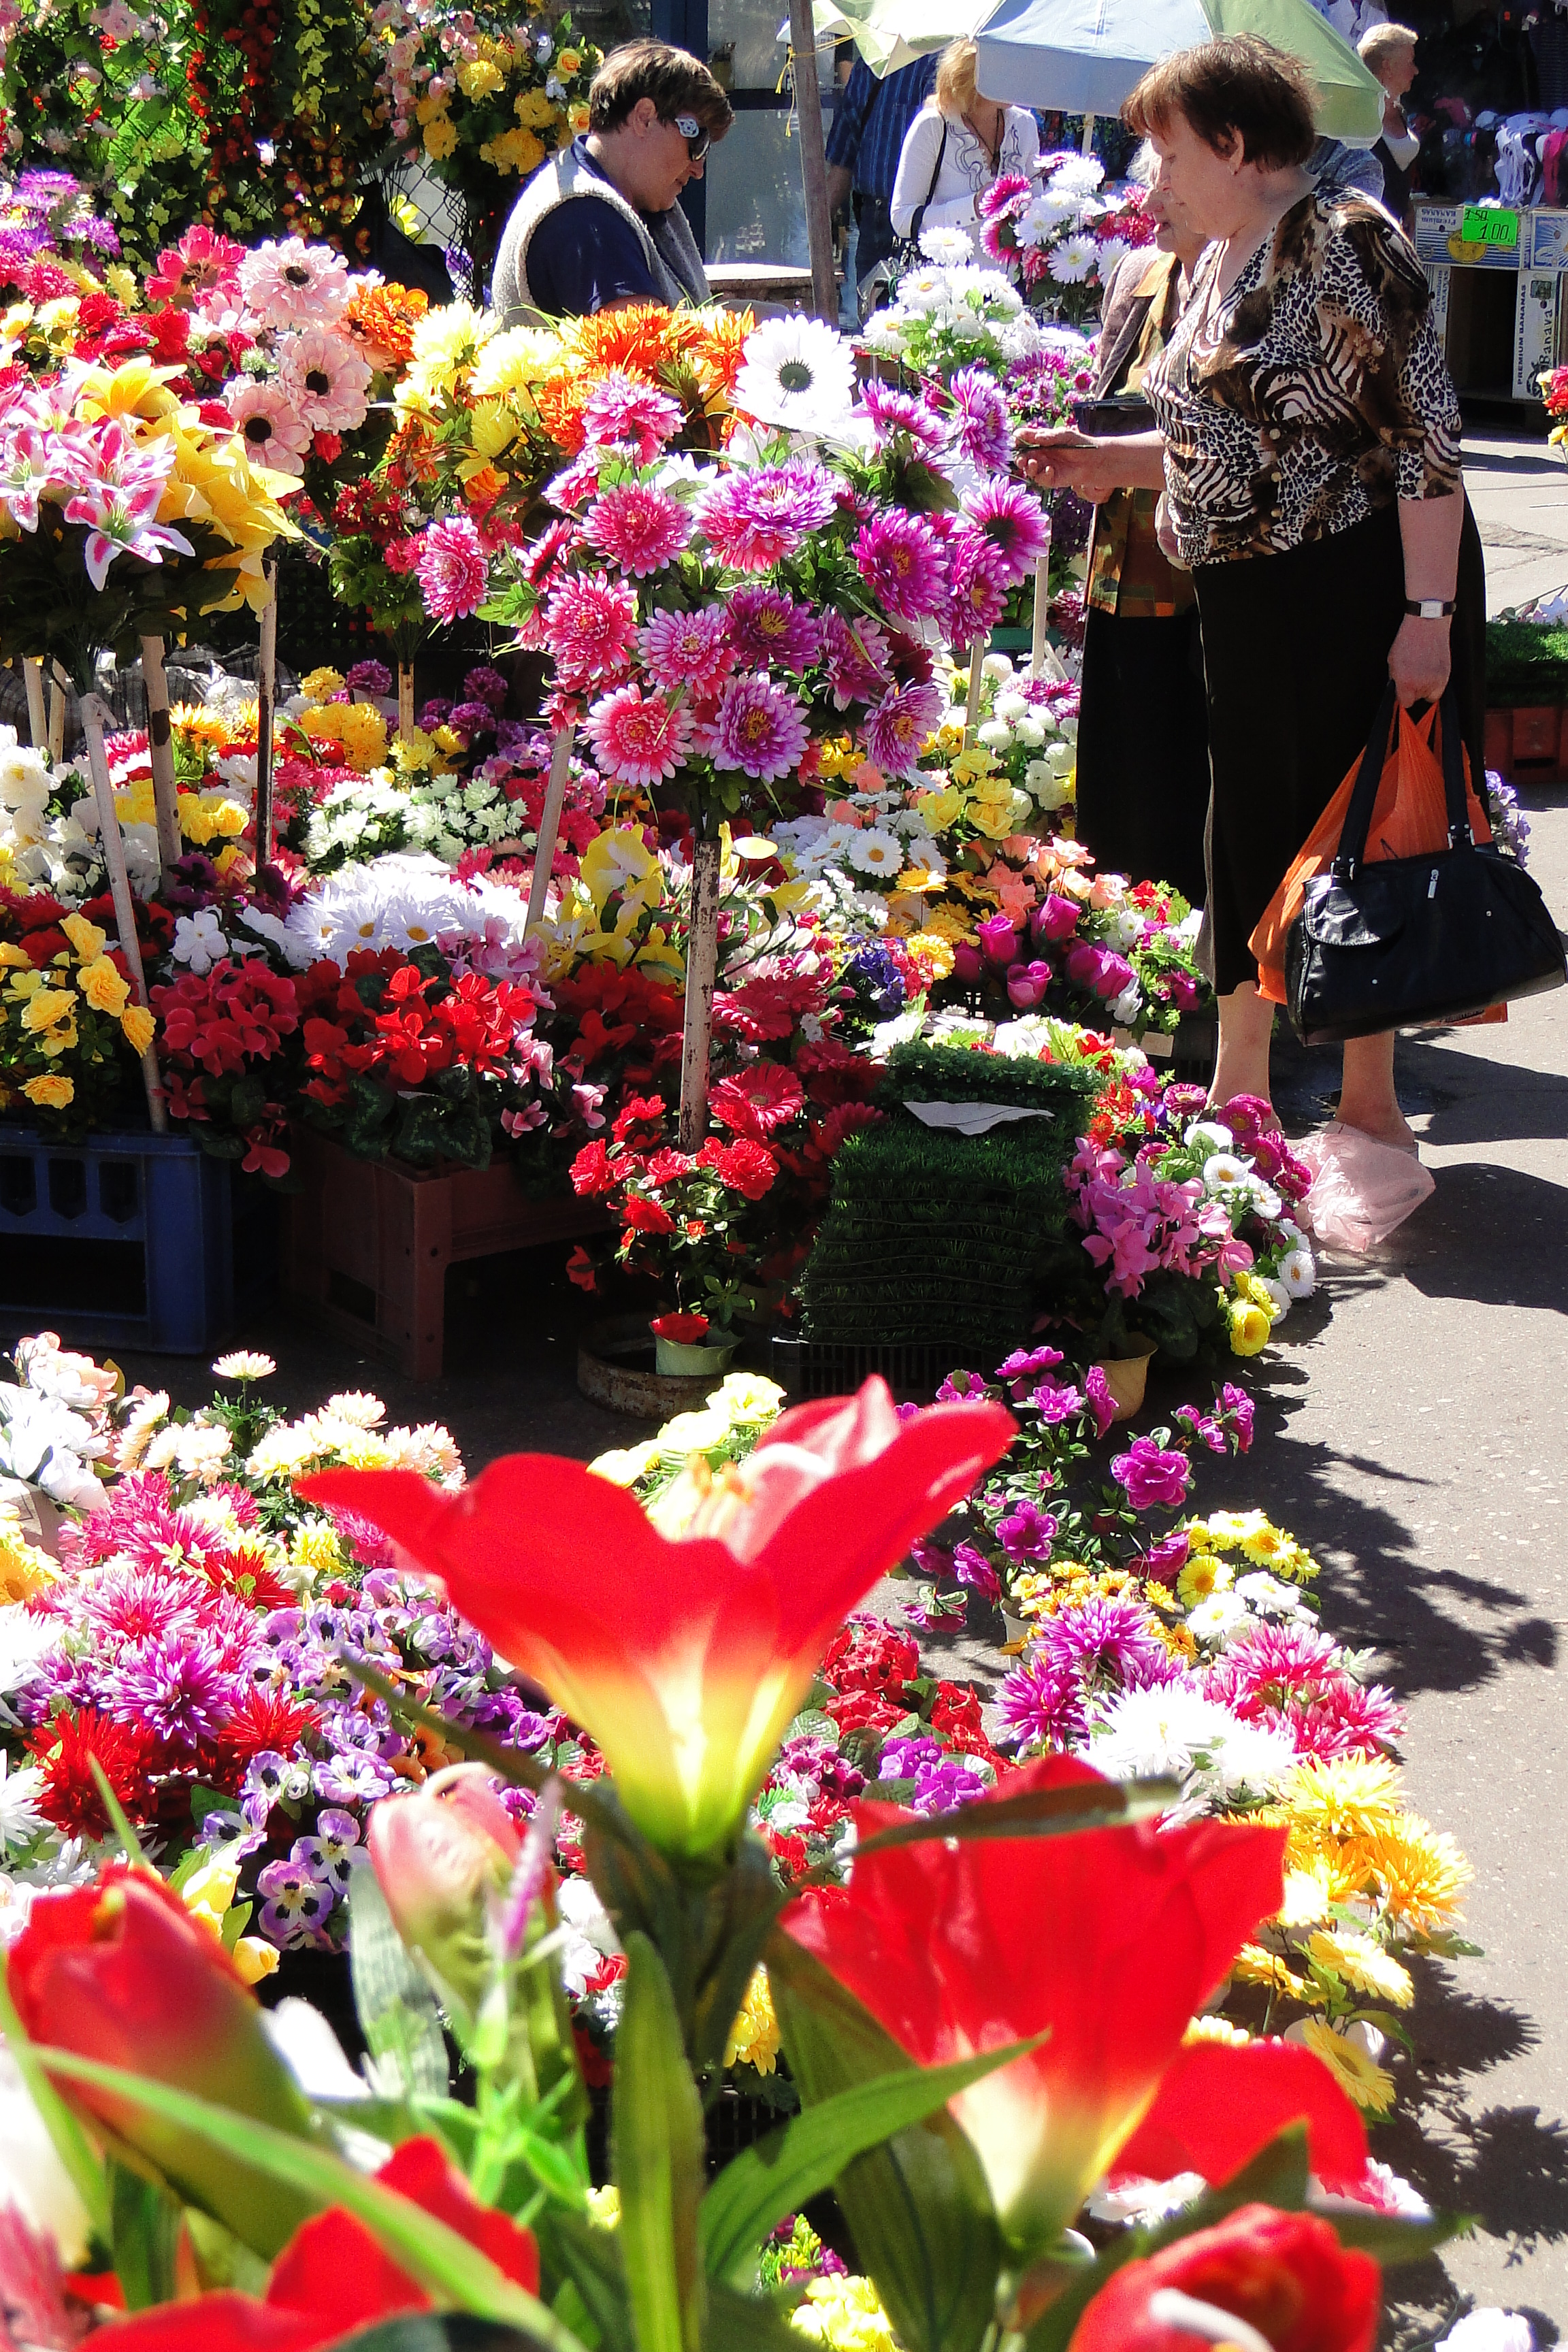 File:Flowers for Sale at Central Market - Riga - Latvia.jpg ...